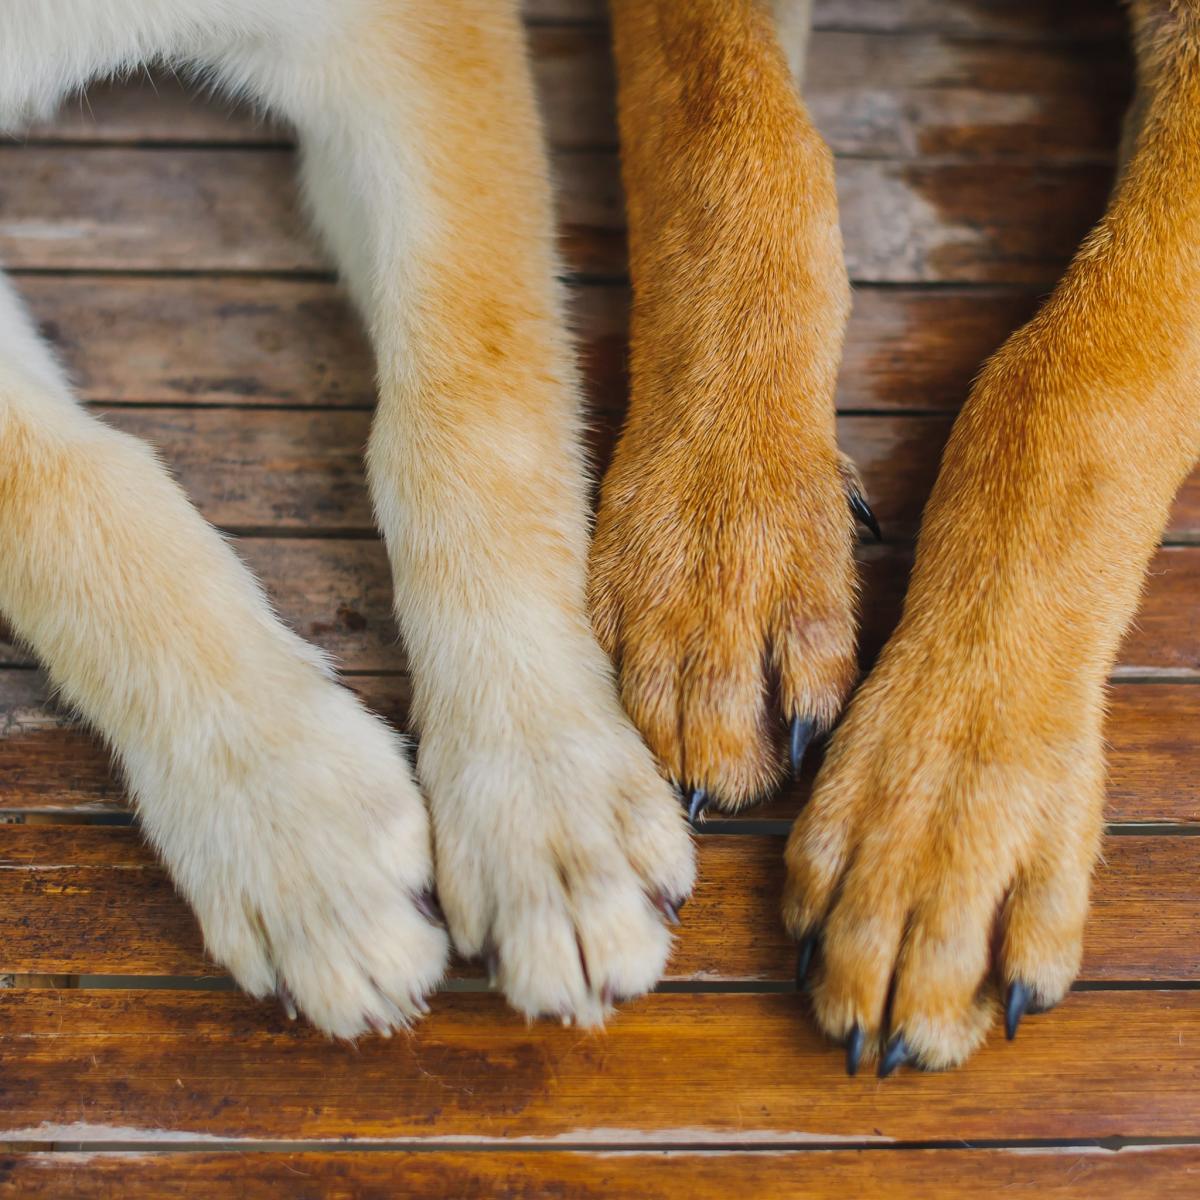 is it bad if dogs bite their nails